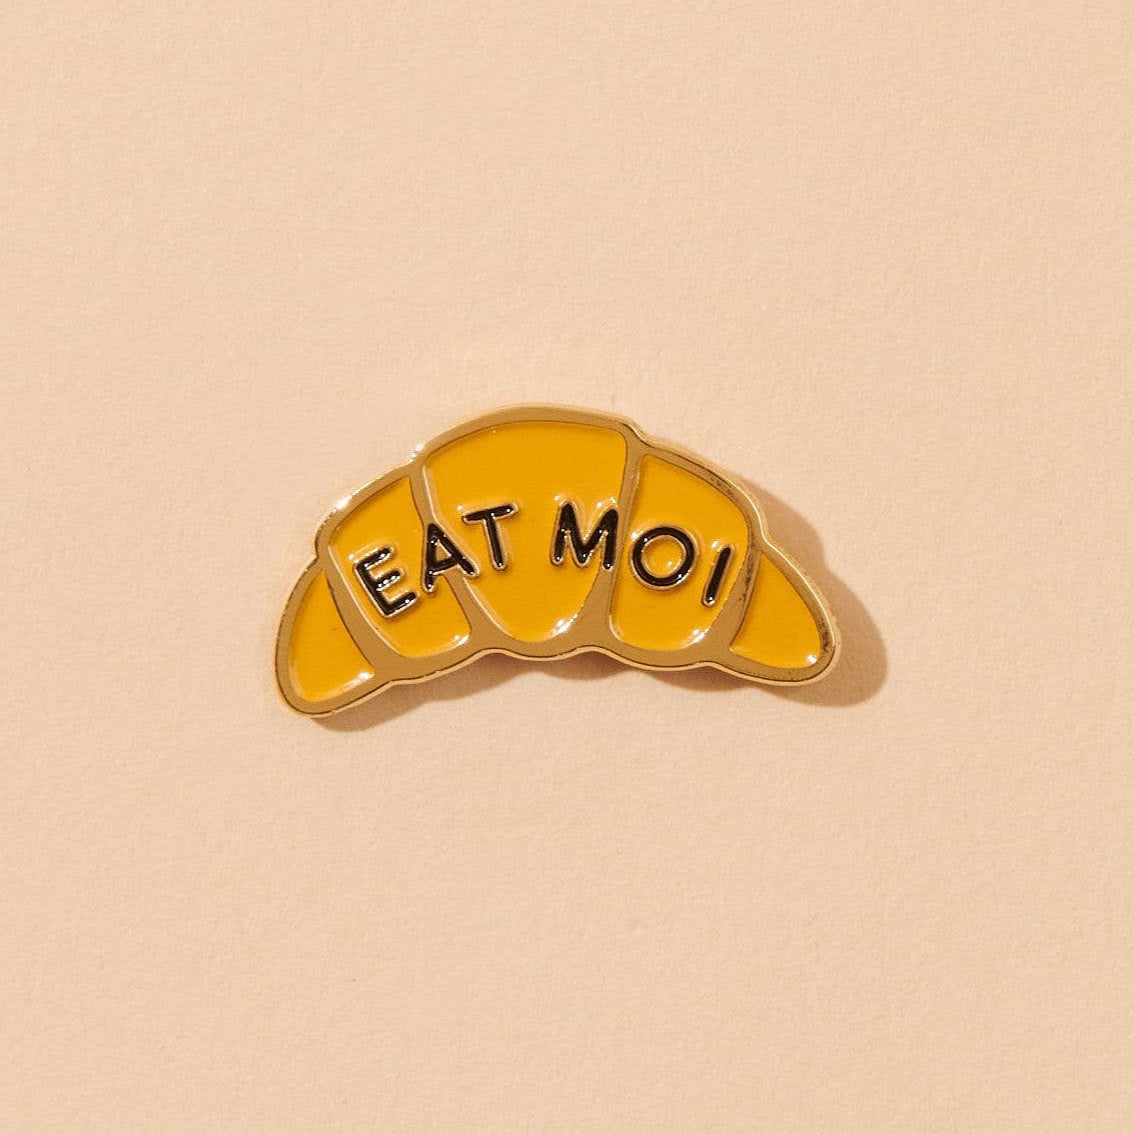 Enamel pin in the shape of a croissant that says "EAT MOI"